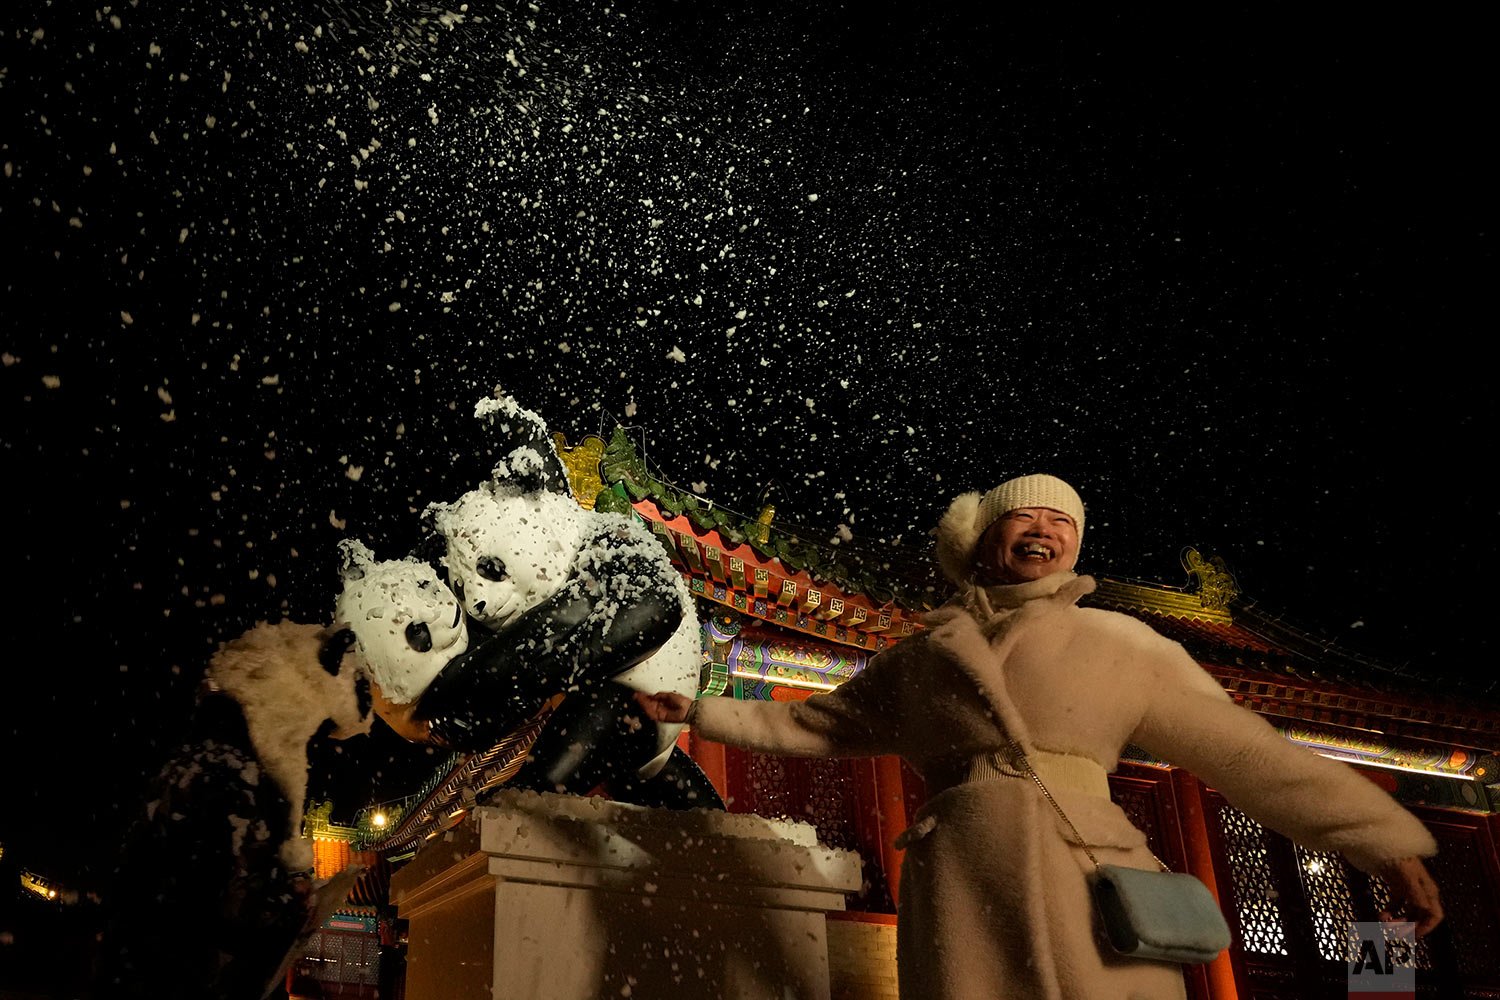  An attendee at an event that coincided with the New Year Eve smiles as fake snow from a foam machine is blown overhead in Beijing, China, Friday, Dec. 31, 2021. (AP Photo/Ng Han Guan) 